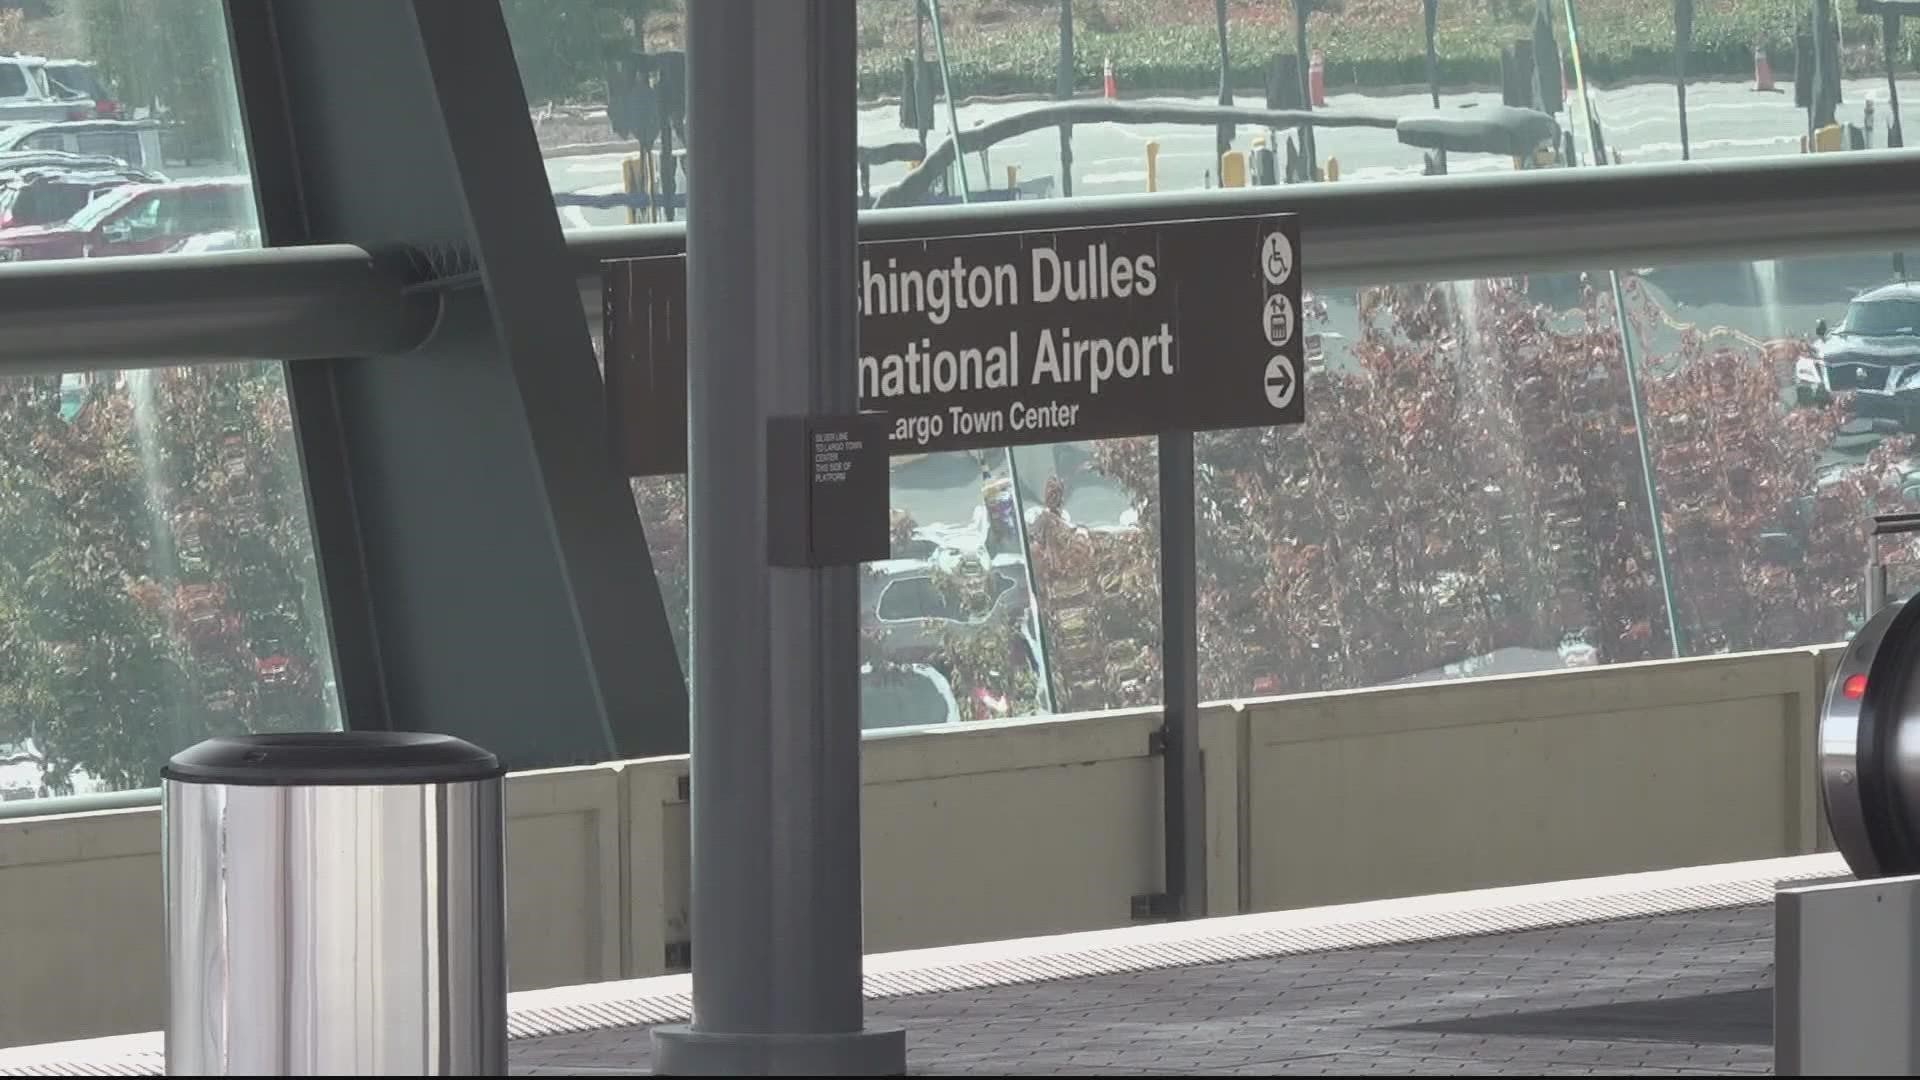 Seven decades in the planning, the long-awaited opening of Metrorail to Dulles and beyond is two days away. Metro says trains should run about every 15 minutes